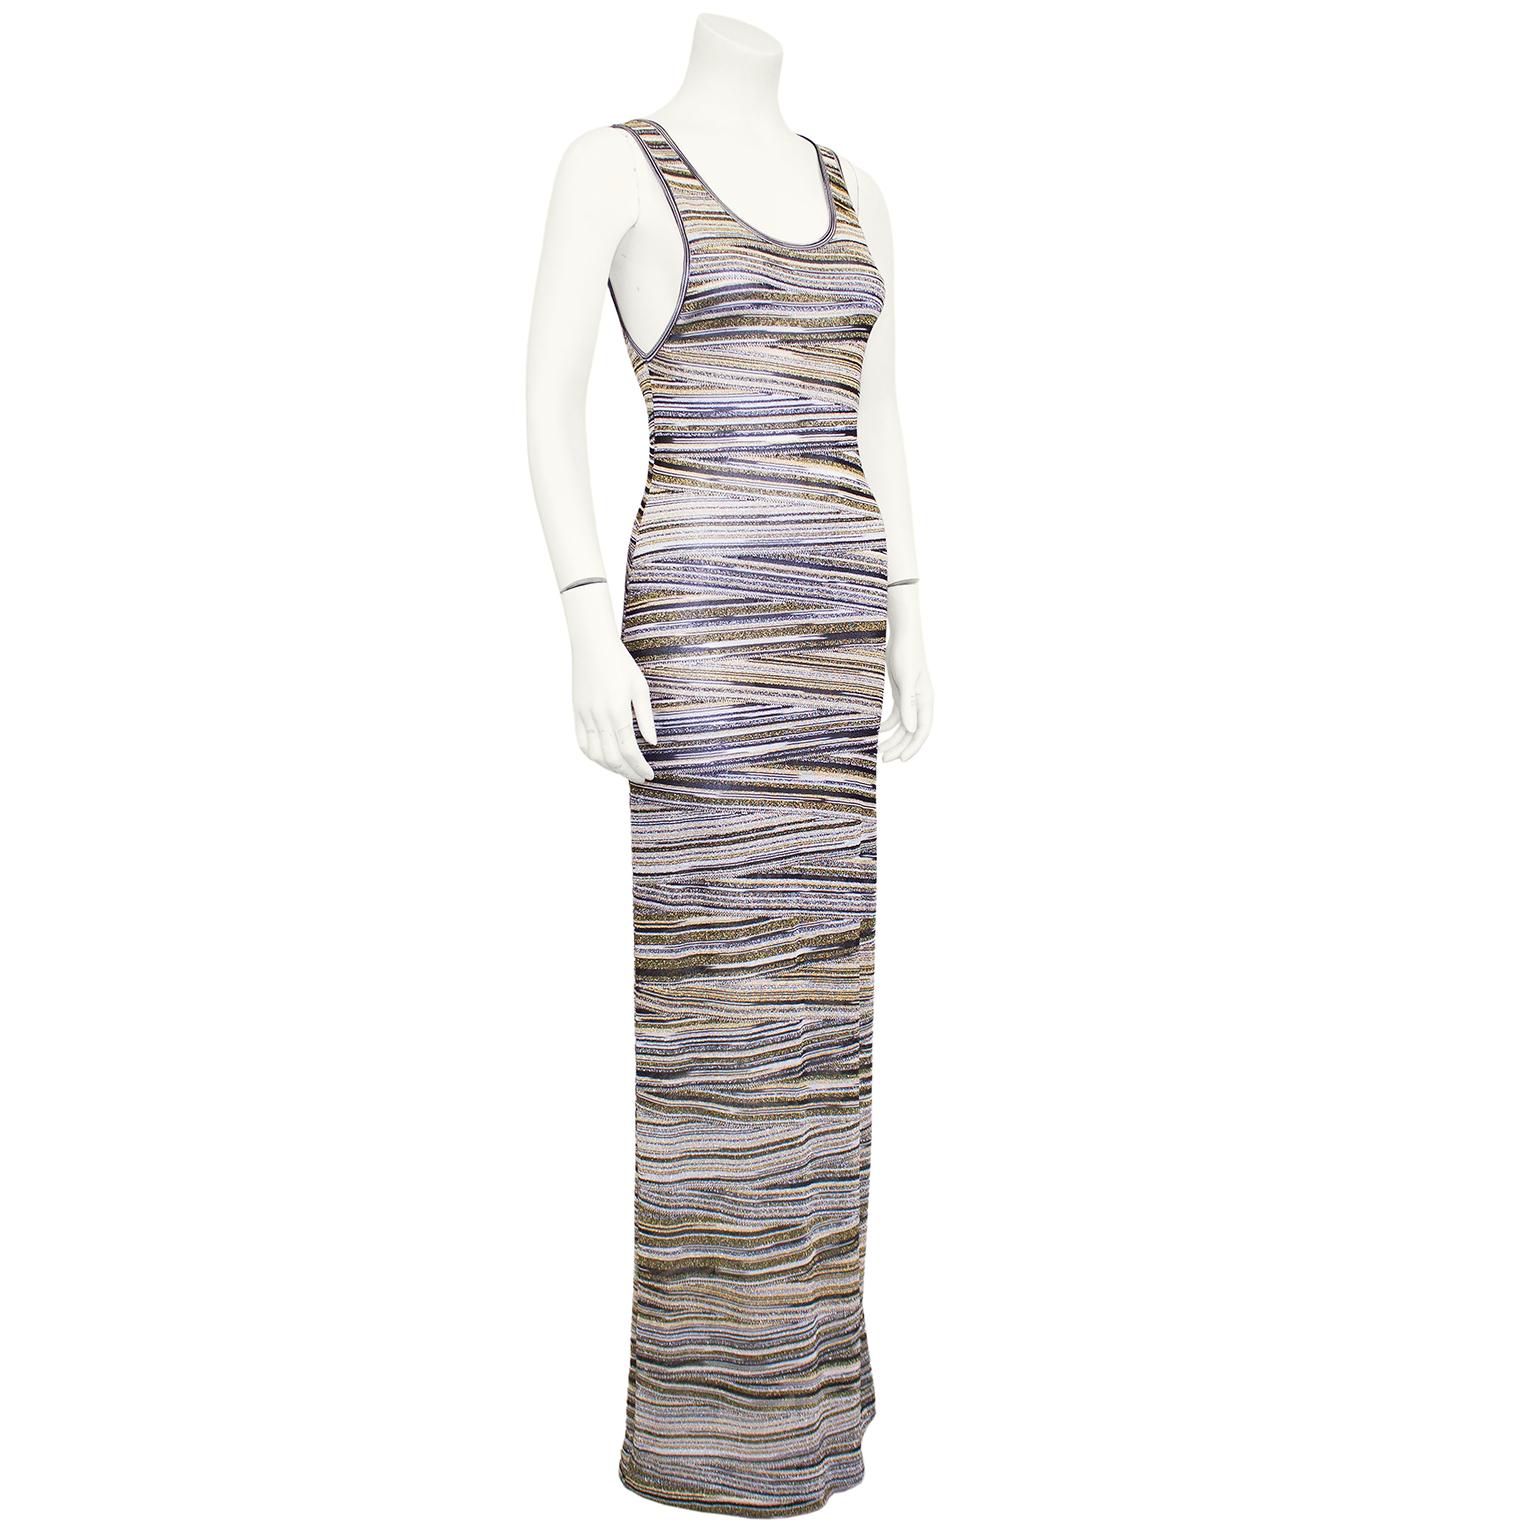 Lovely Missoni grey, silver, black and gold metallic lurex abstract horizontal stripe knit maxi dress from the 1990s. Sleeveless with a round neckline. Unlined - can be worn sheer or with a slip underneath. Can be daytime chic with flats, or dressed